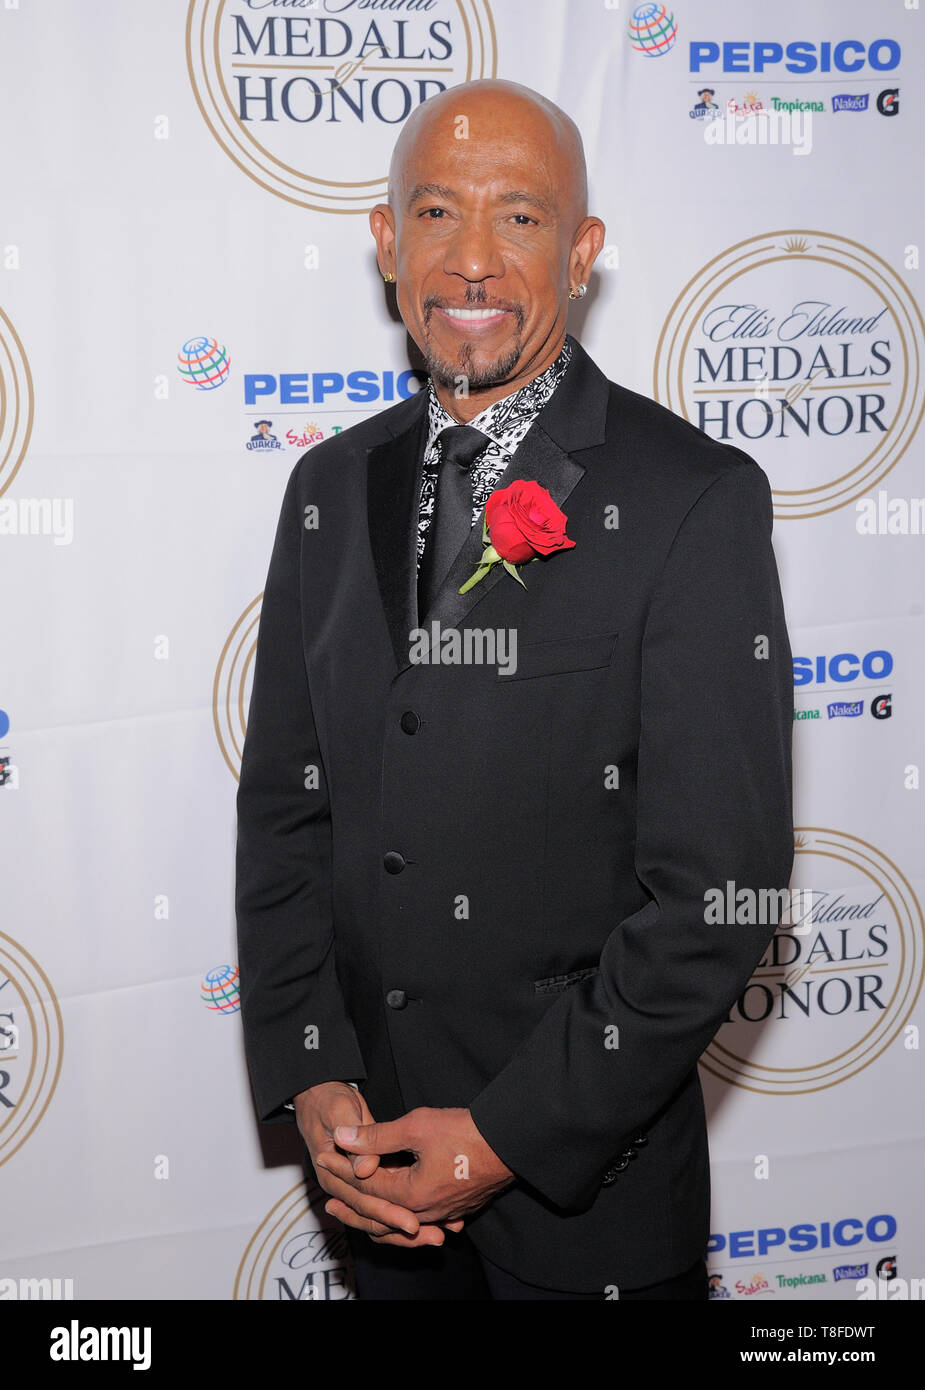 Ellis Island, NY - May 11, 2019: Montel Williams attends the 34th Annual Ellis Island Medals Of Honor Ceremony at Ellis Island Stock Photo